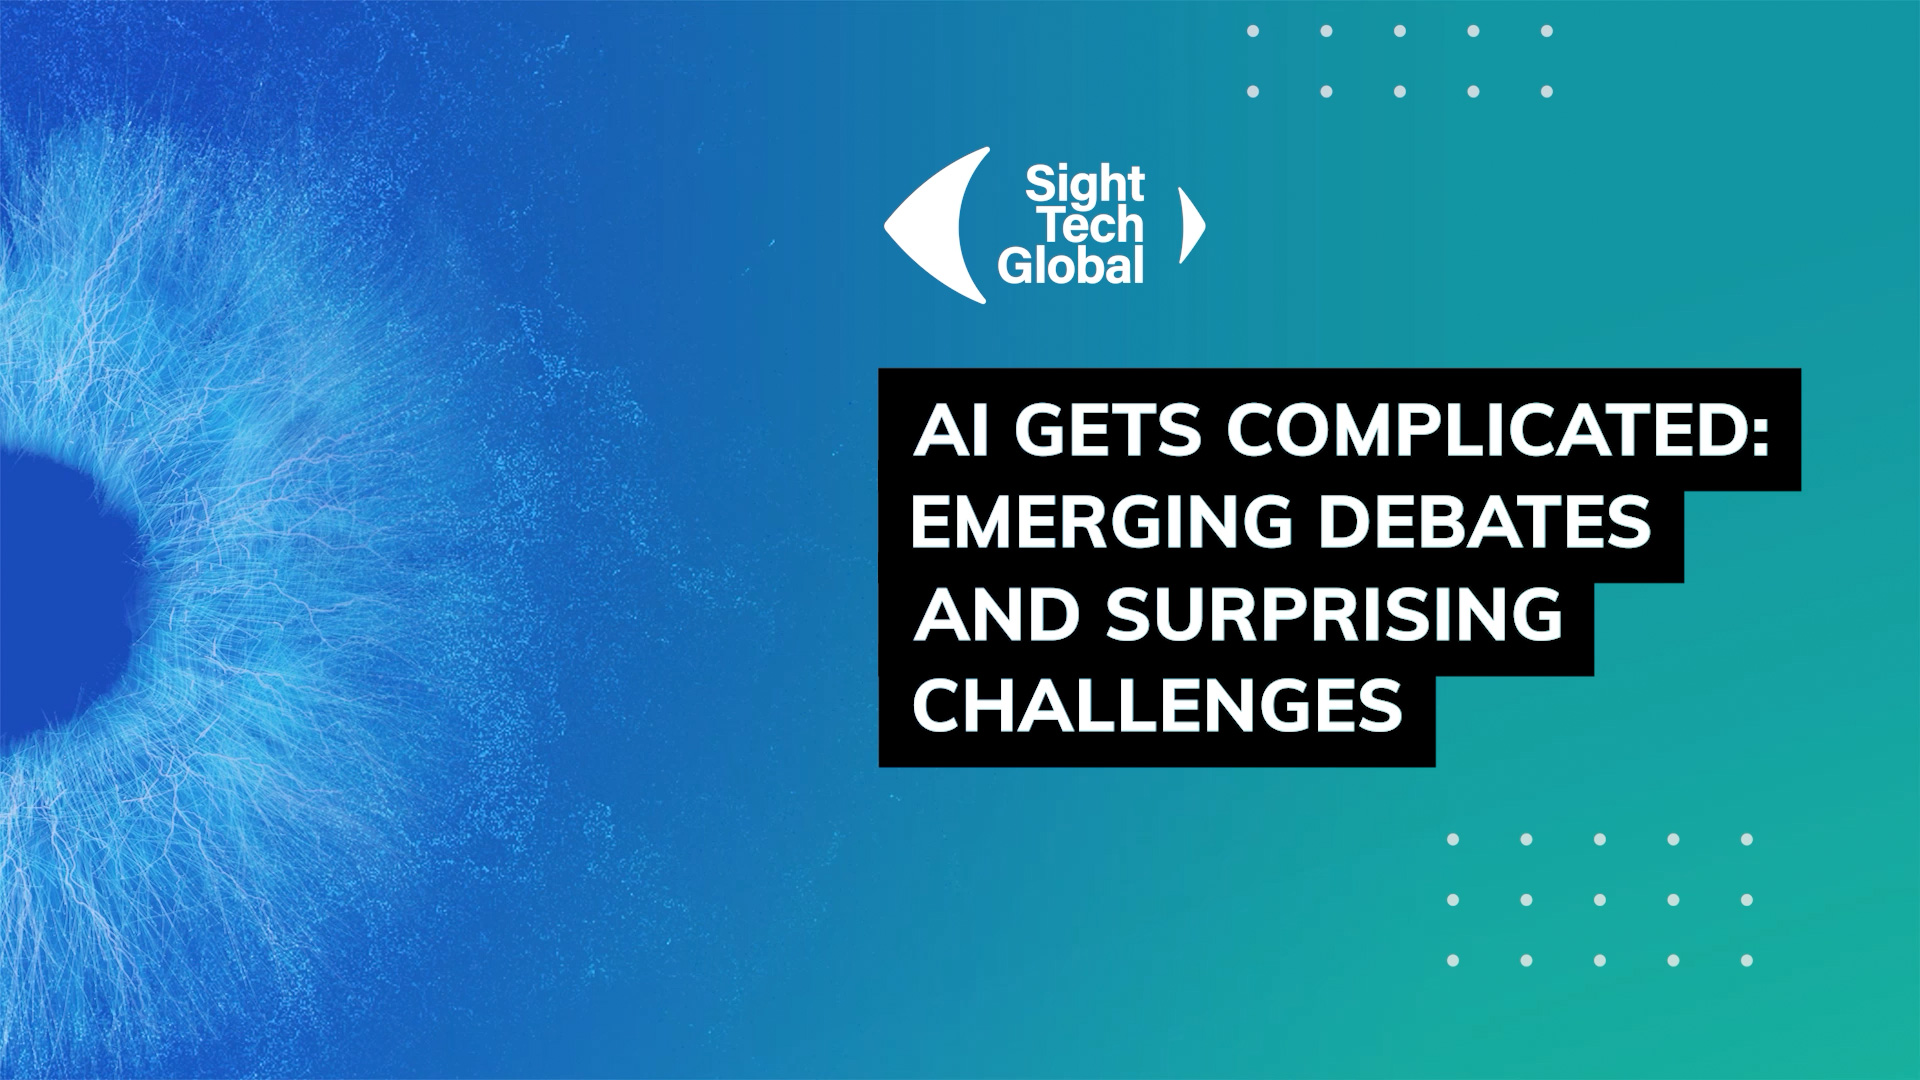 AI gets complicated: emerging debates and surprising challenges